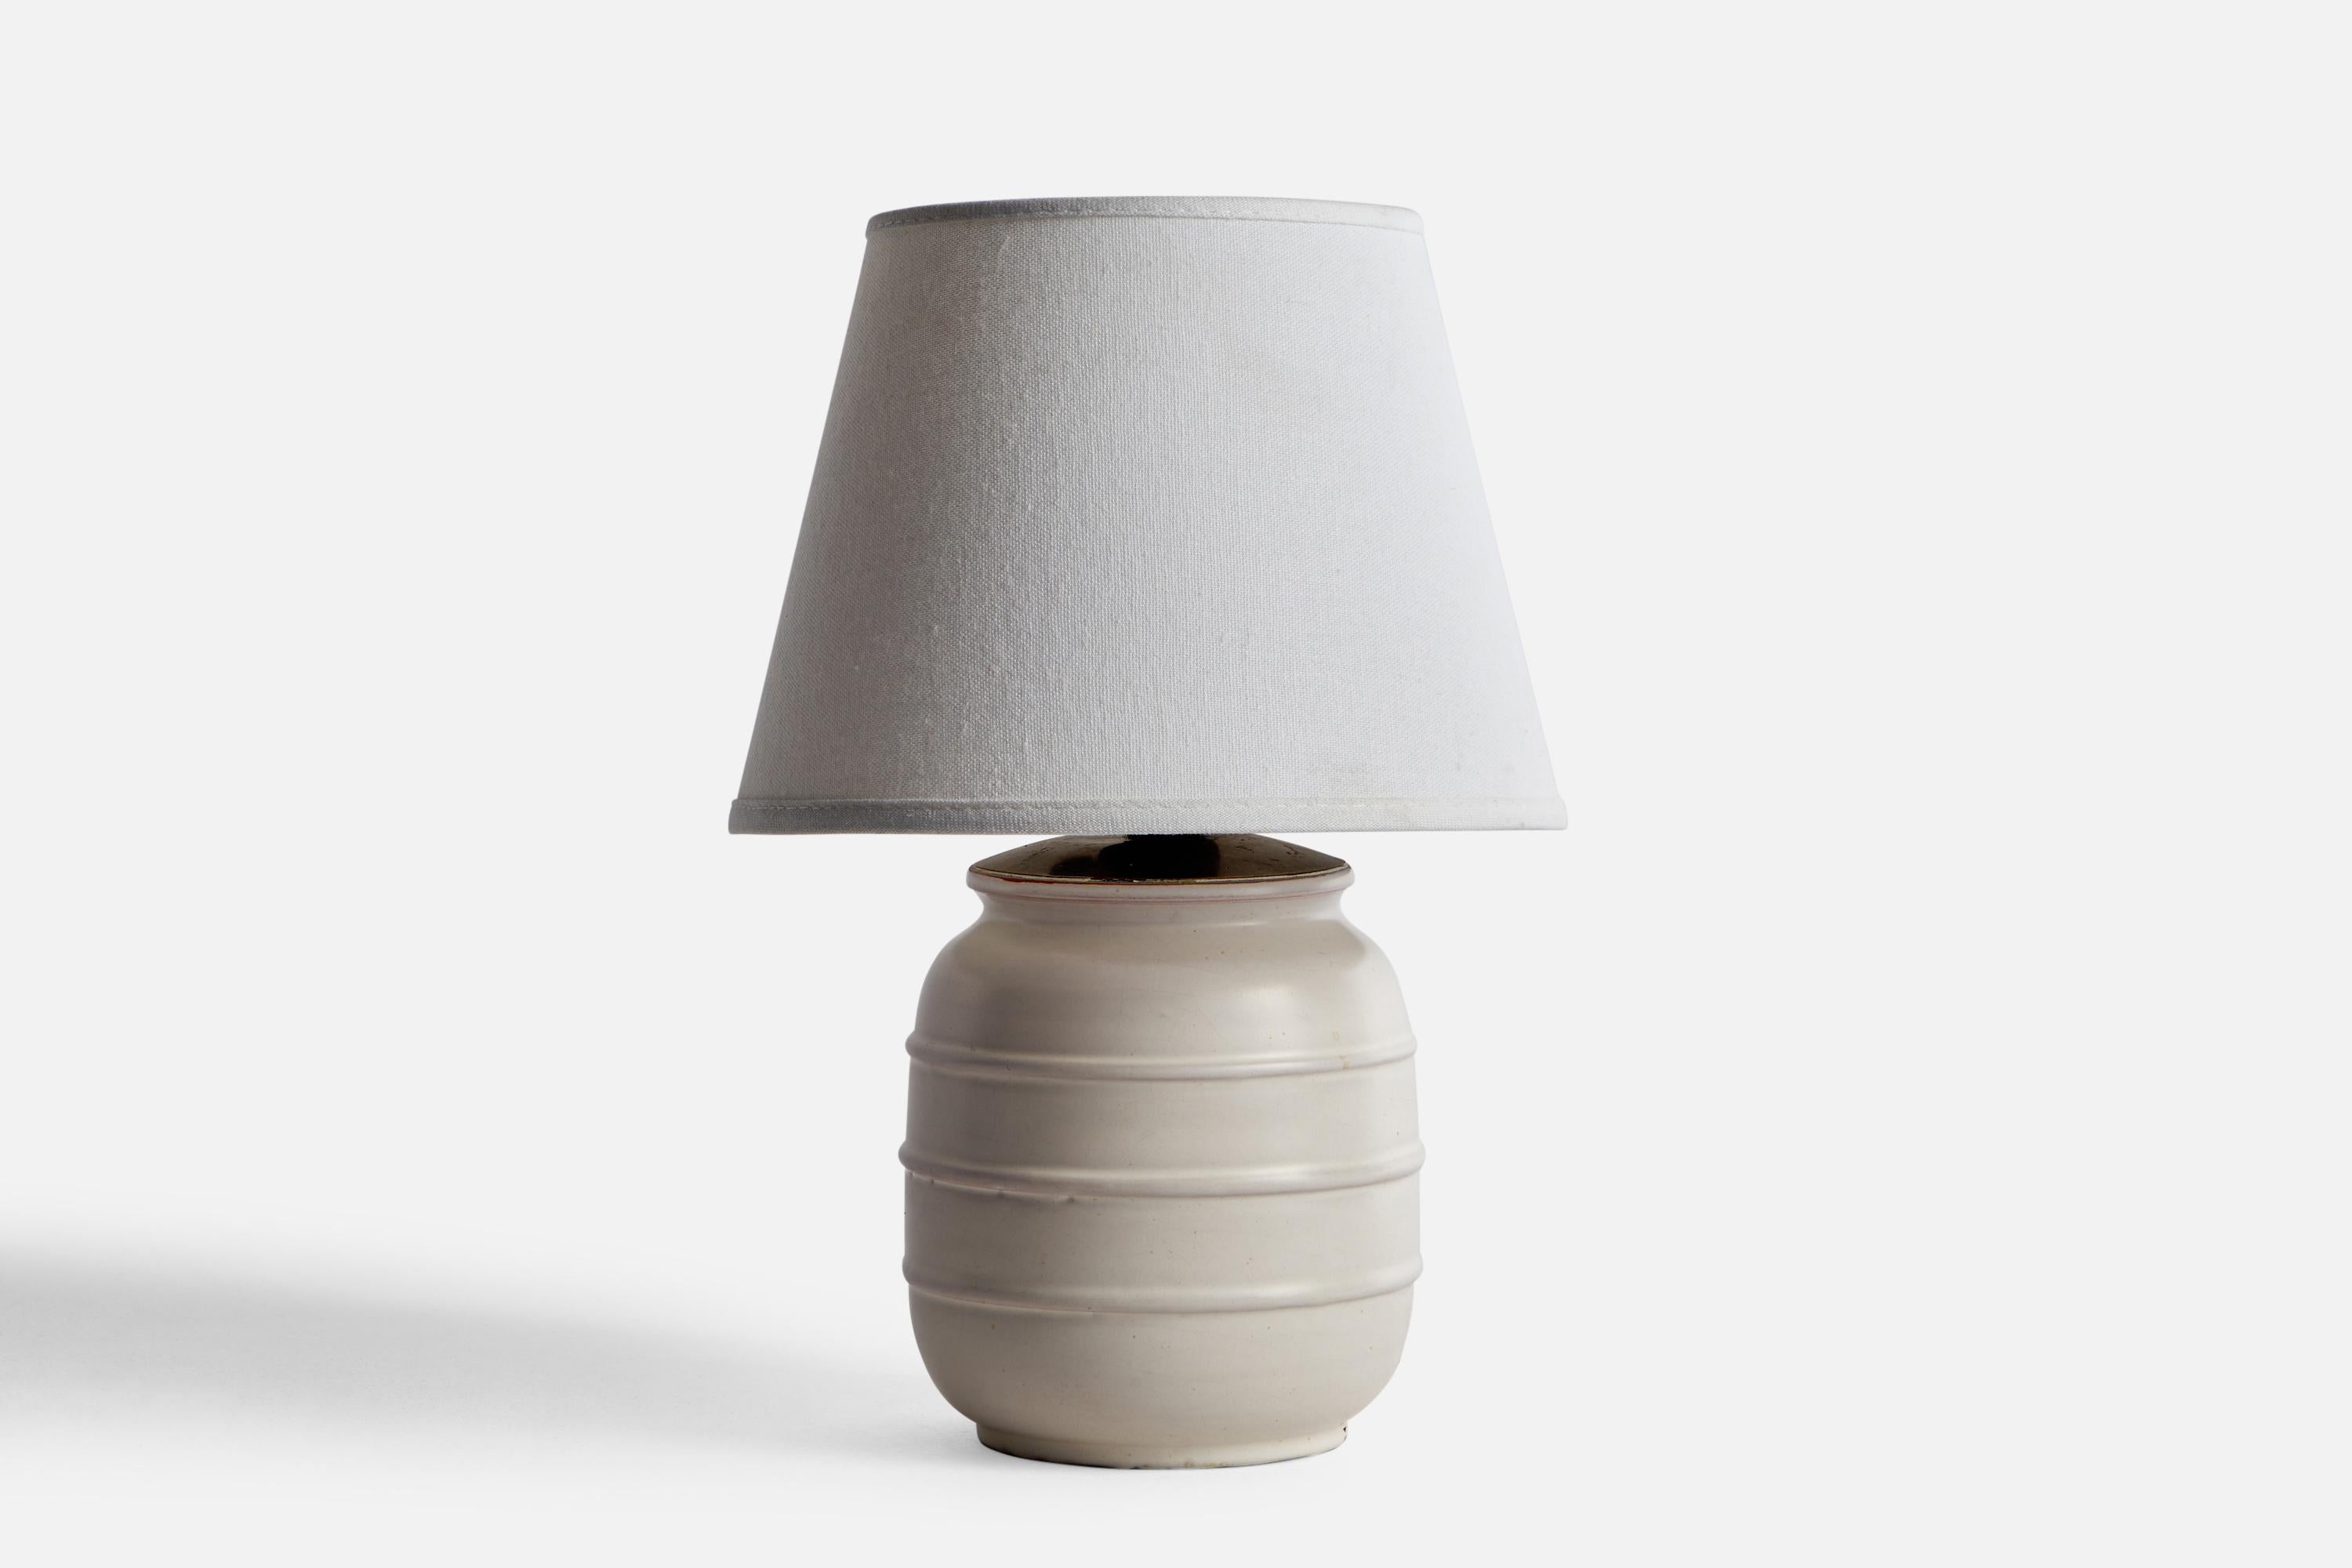 A light-grey ceramic and brass table lamp designed by Jerk Werkmäster and produced by Nittsjö, Sweden, c. 1930s.

Dimensions of Lamp (inches): 9” H x 5” Diameter
Dimensions of Shade (inches): 4.5” Top Diameter x 10” Bottom Diameter x 5.25”